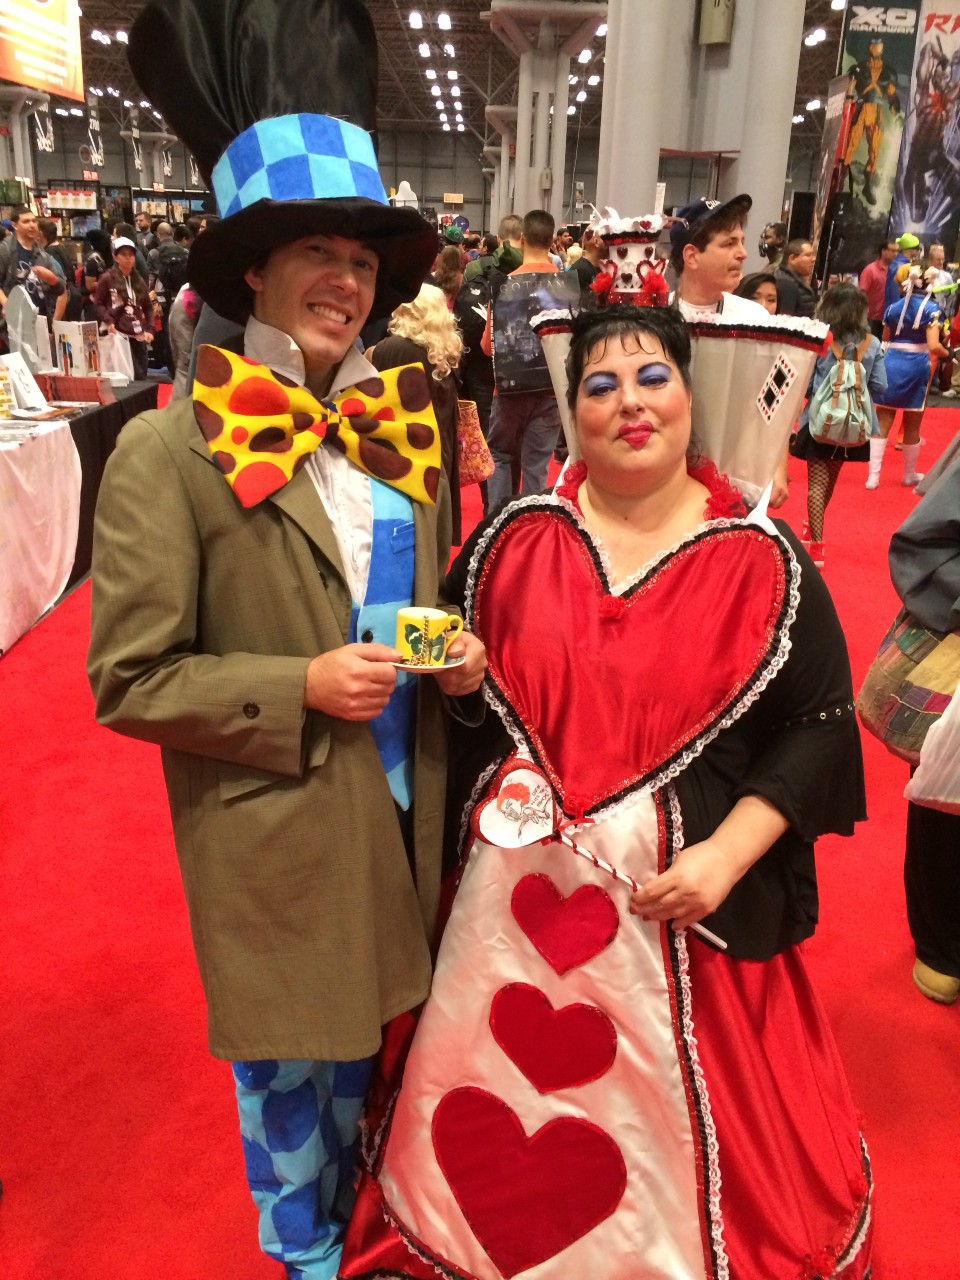 The Mad Hatter and The Queen of Hearts from Alice in Wonderland